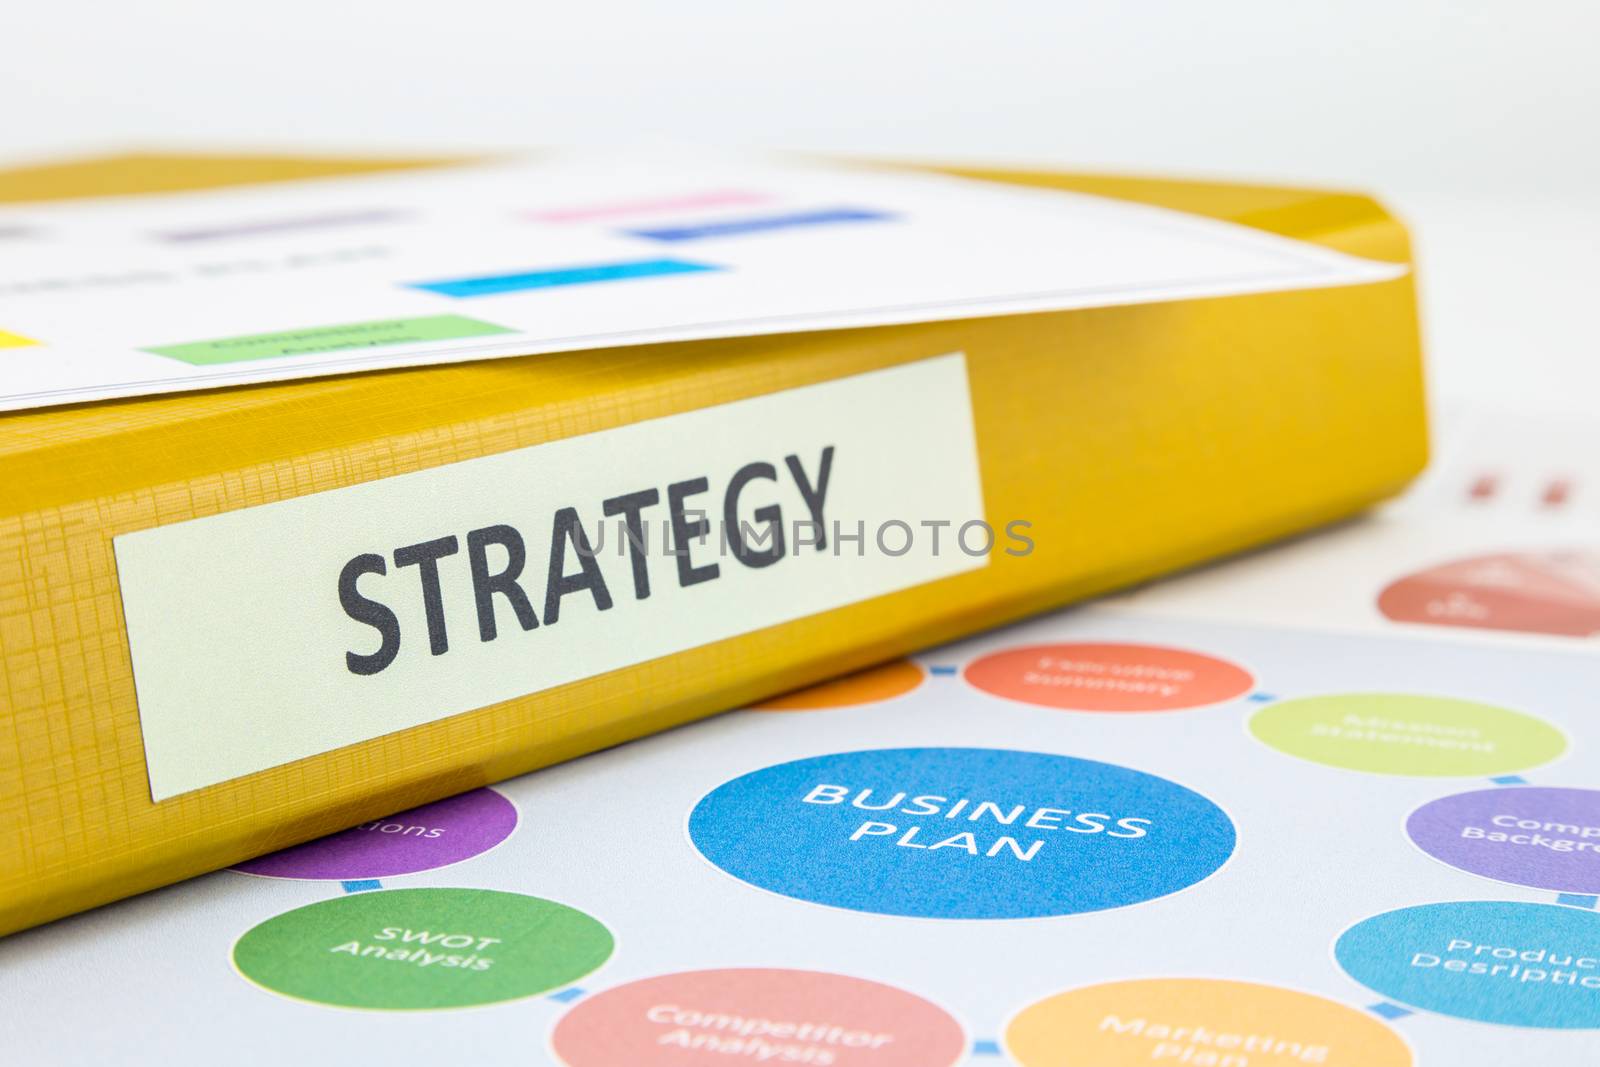 Strategy Business Plan and SWOT analysis by vinnstock